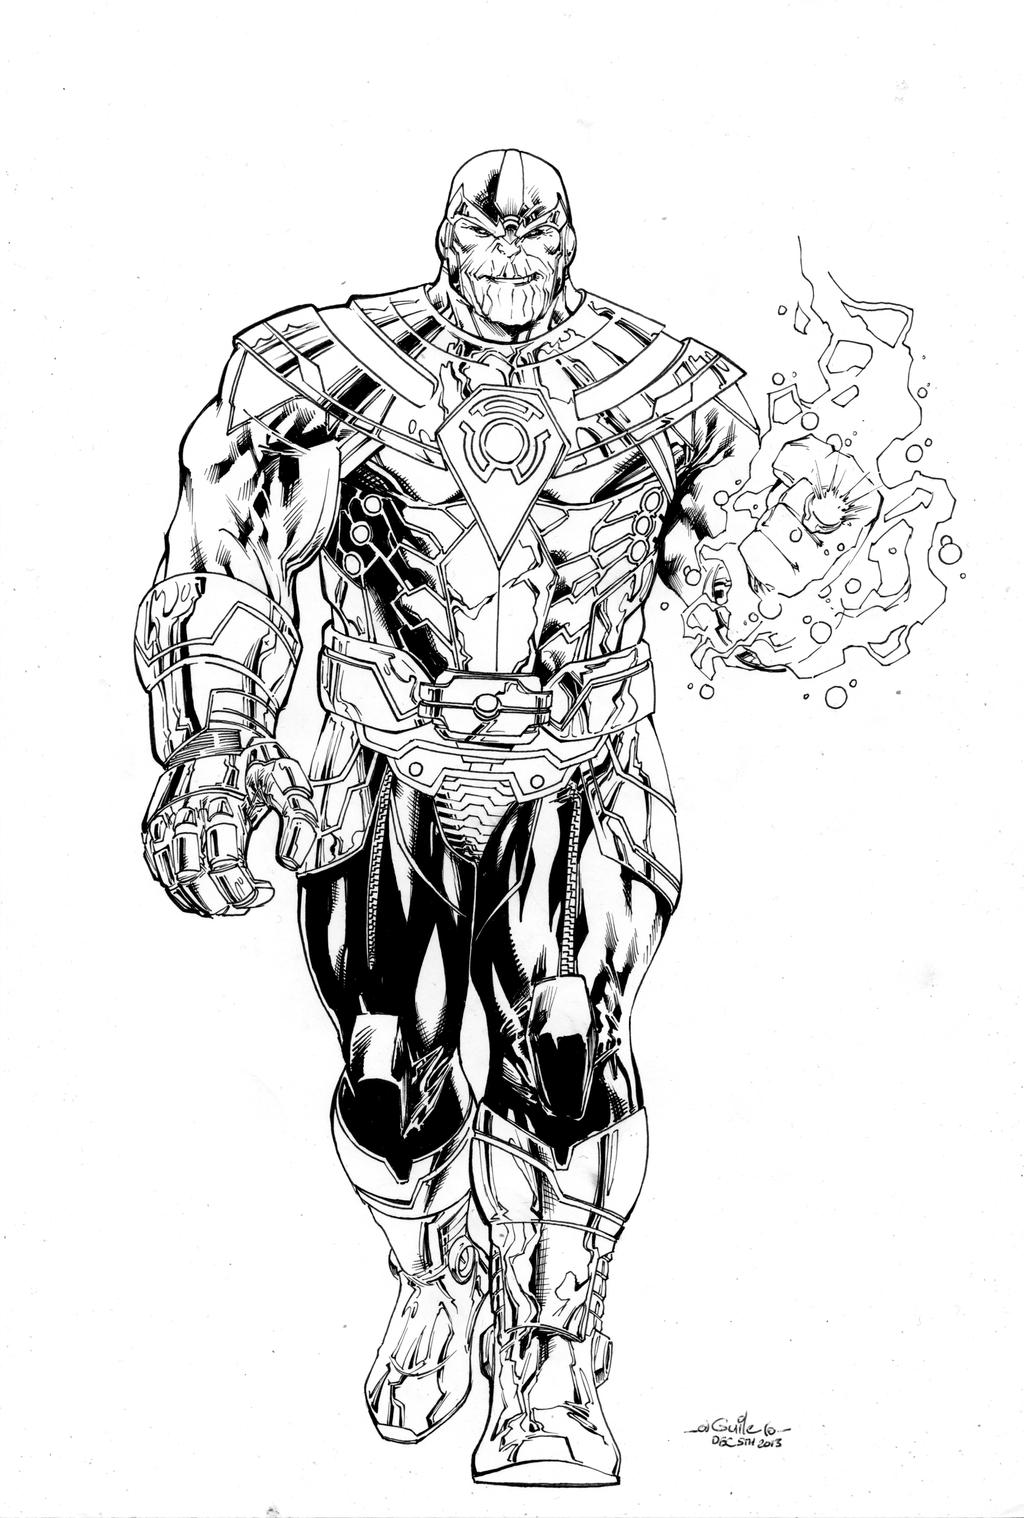 Thanos of Sinestro Corps by SpiderGuile on DeviantArt